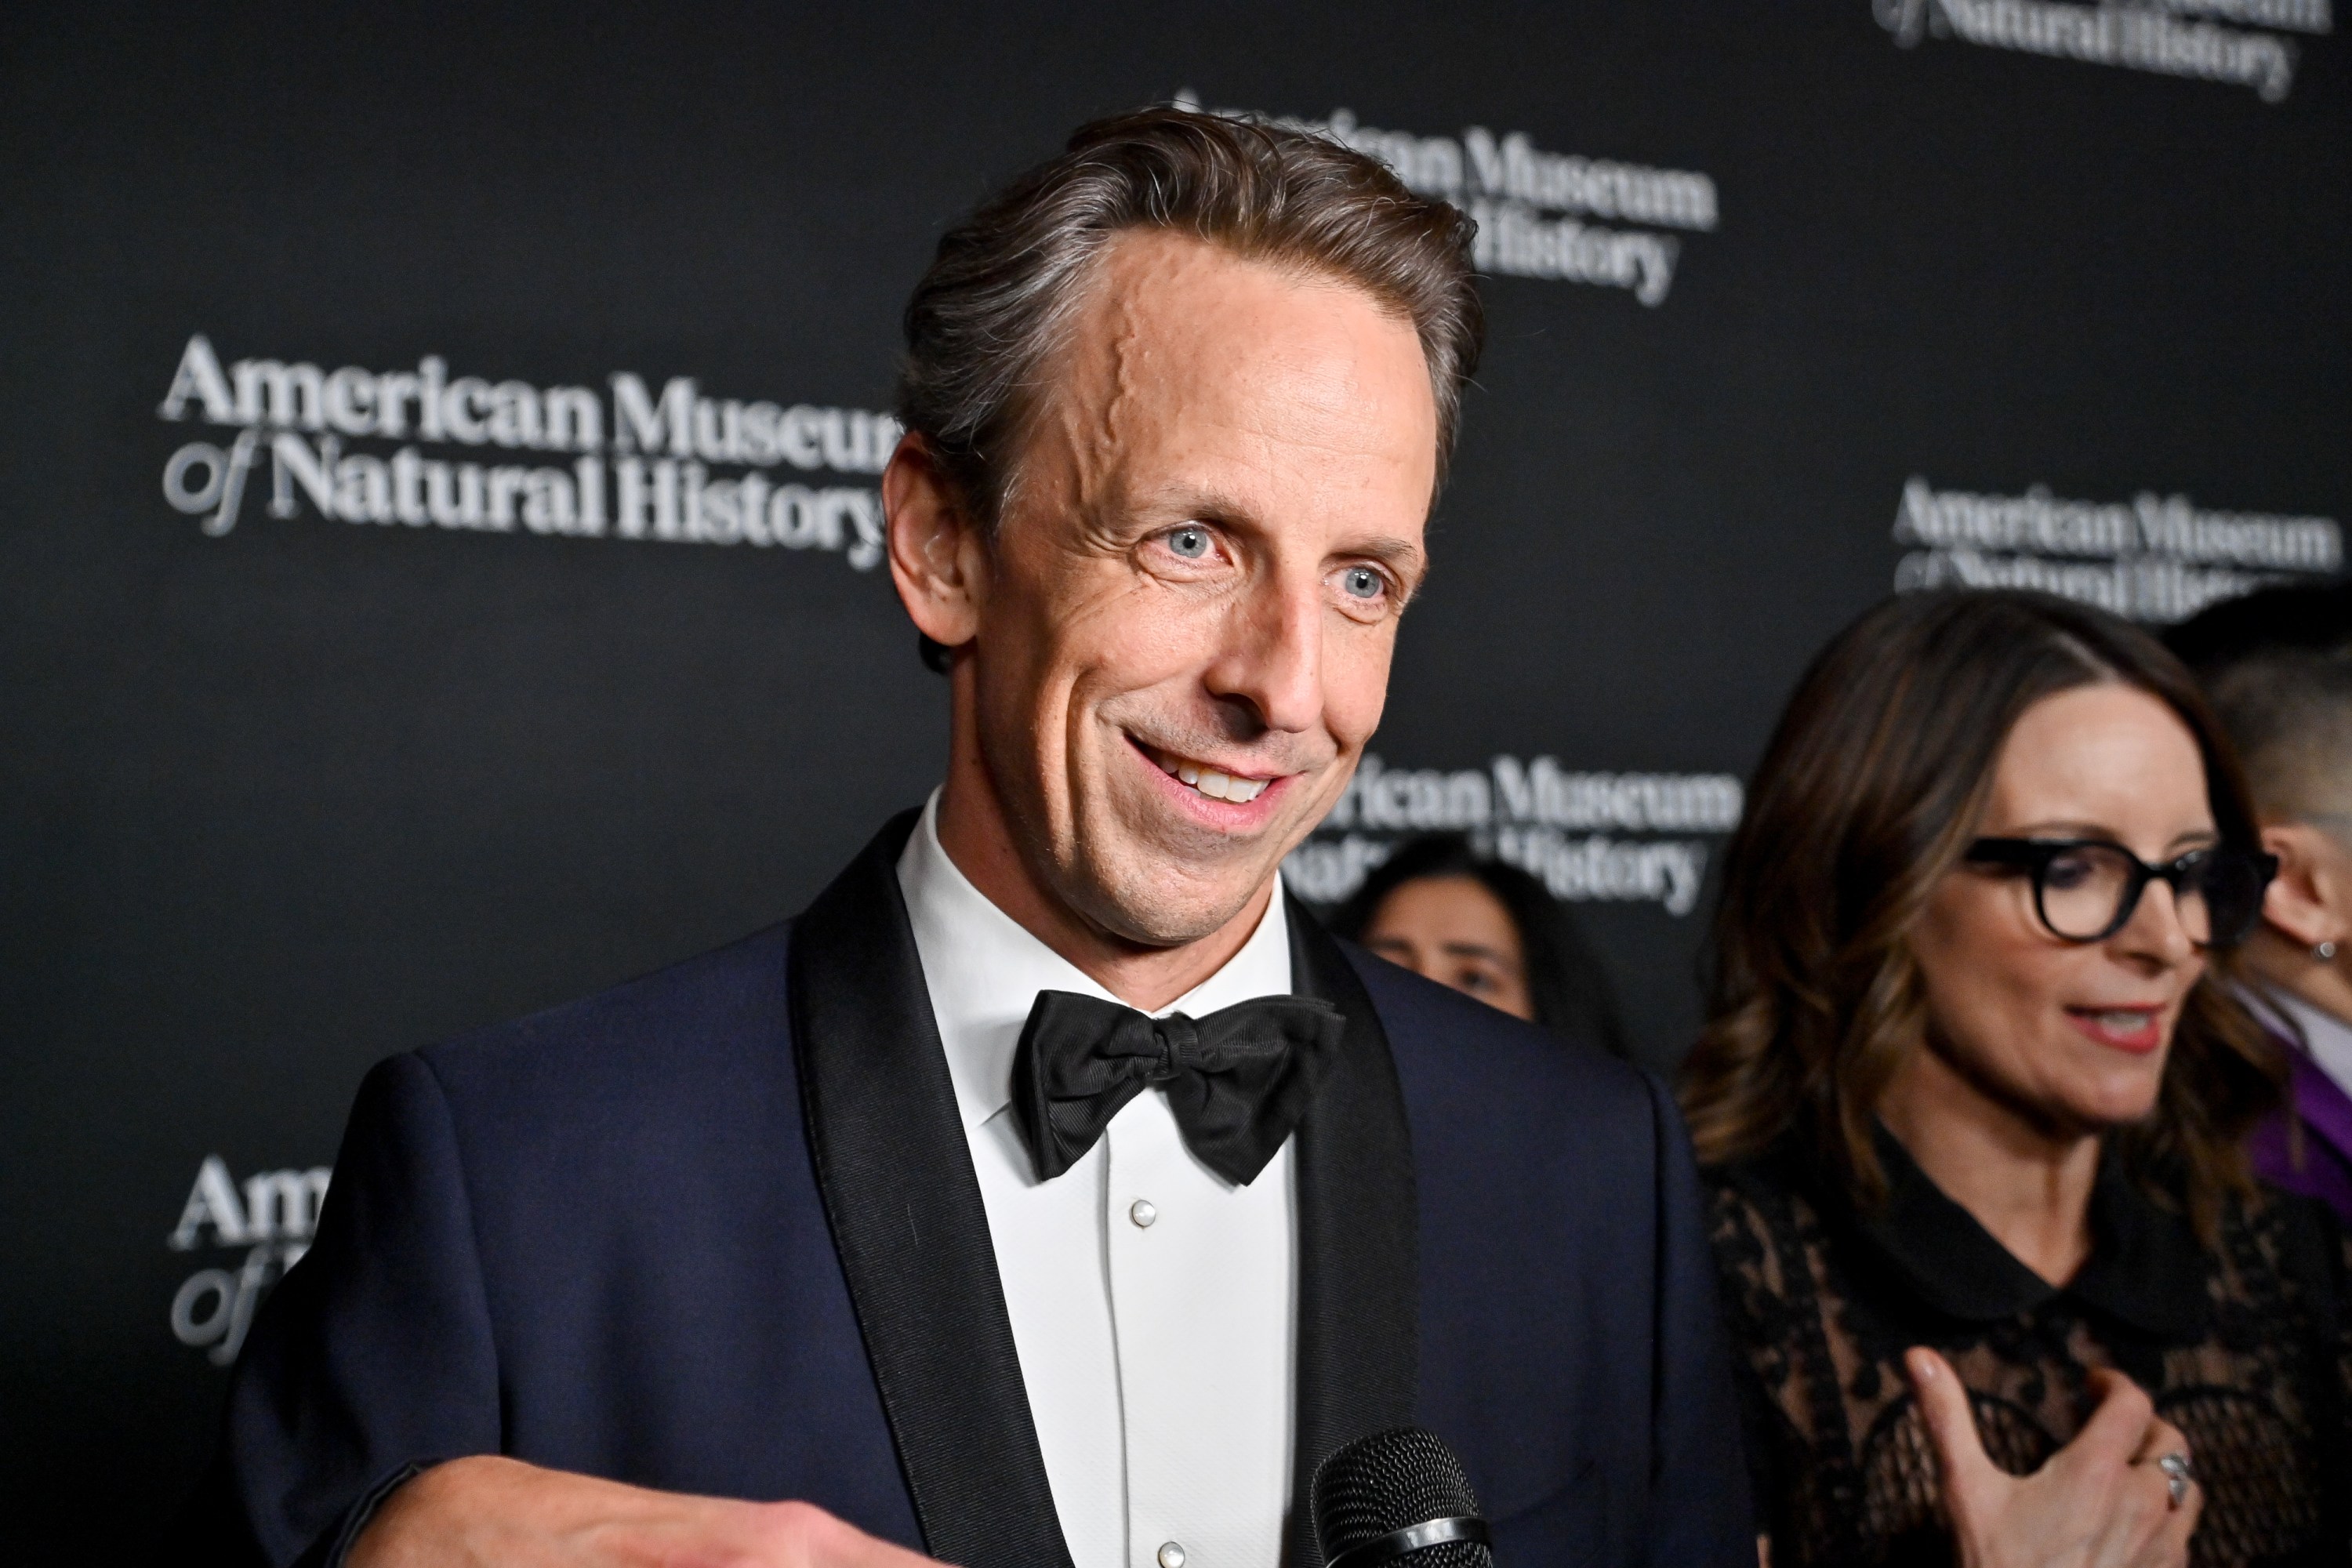 Seth Meyers and Tina Fey at the American Museum of Natural History's 2023 Museum Gala held on November 30, 2023 in New York, New York. (Photo by Bryan Bedder/Variety via Getty Images)